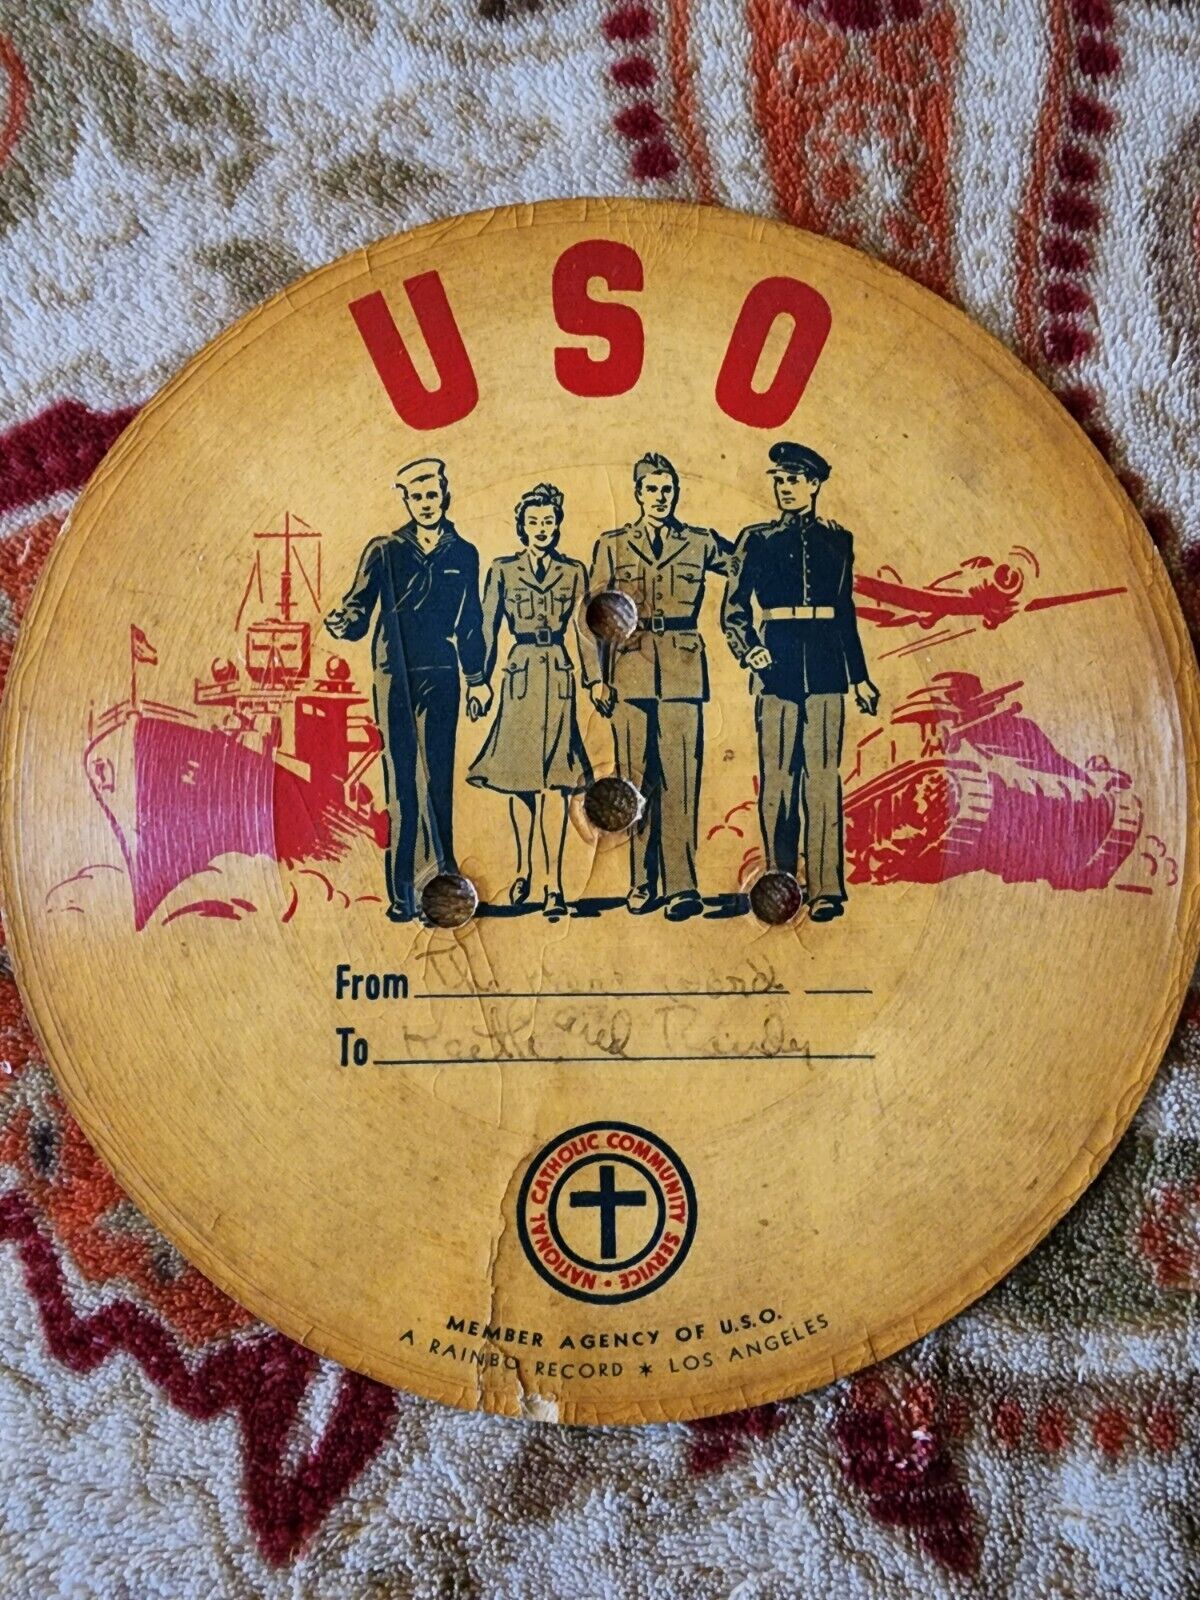 USO Letter on a Record Voice Recording World War II Vintage